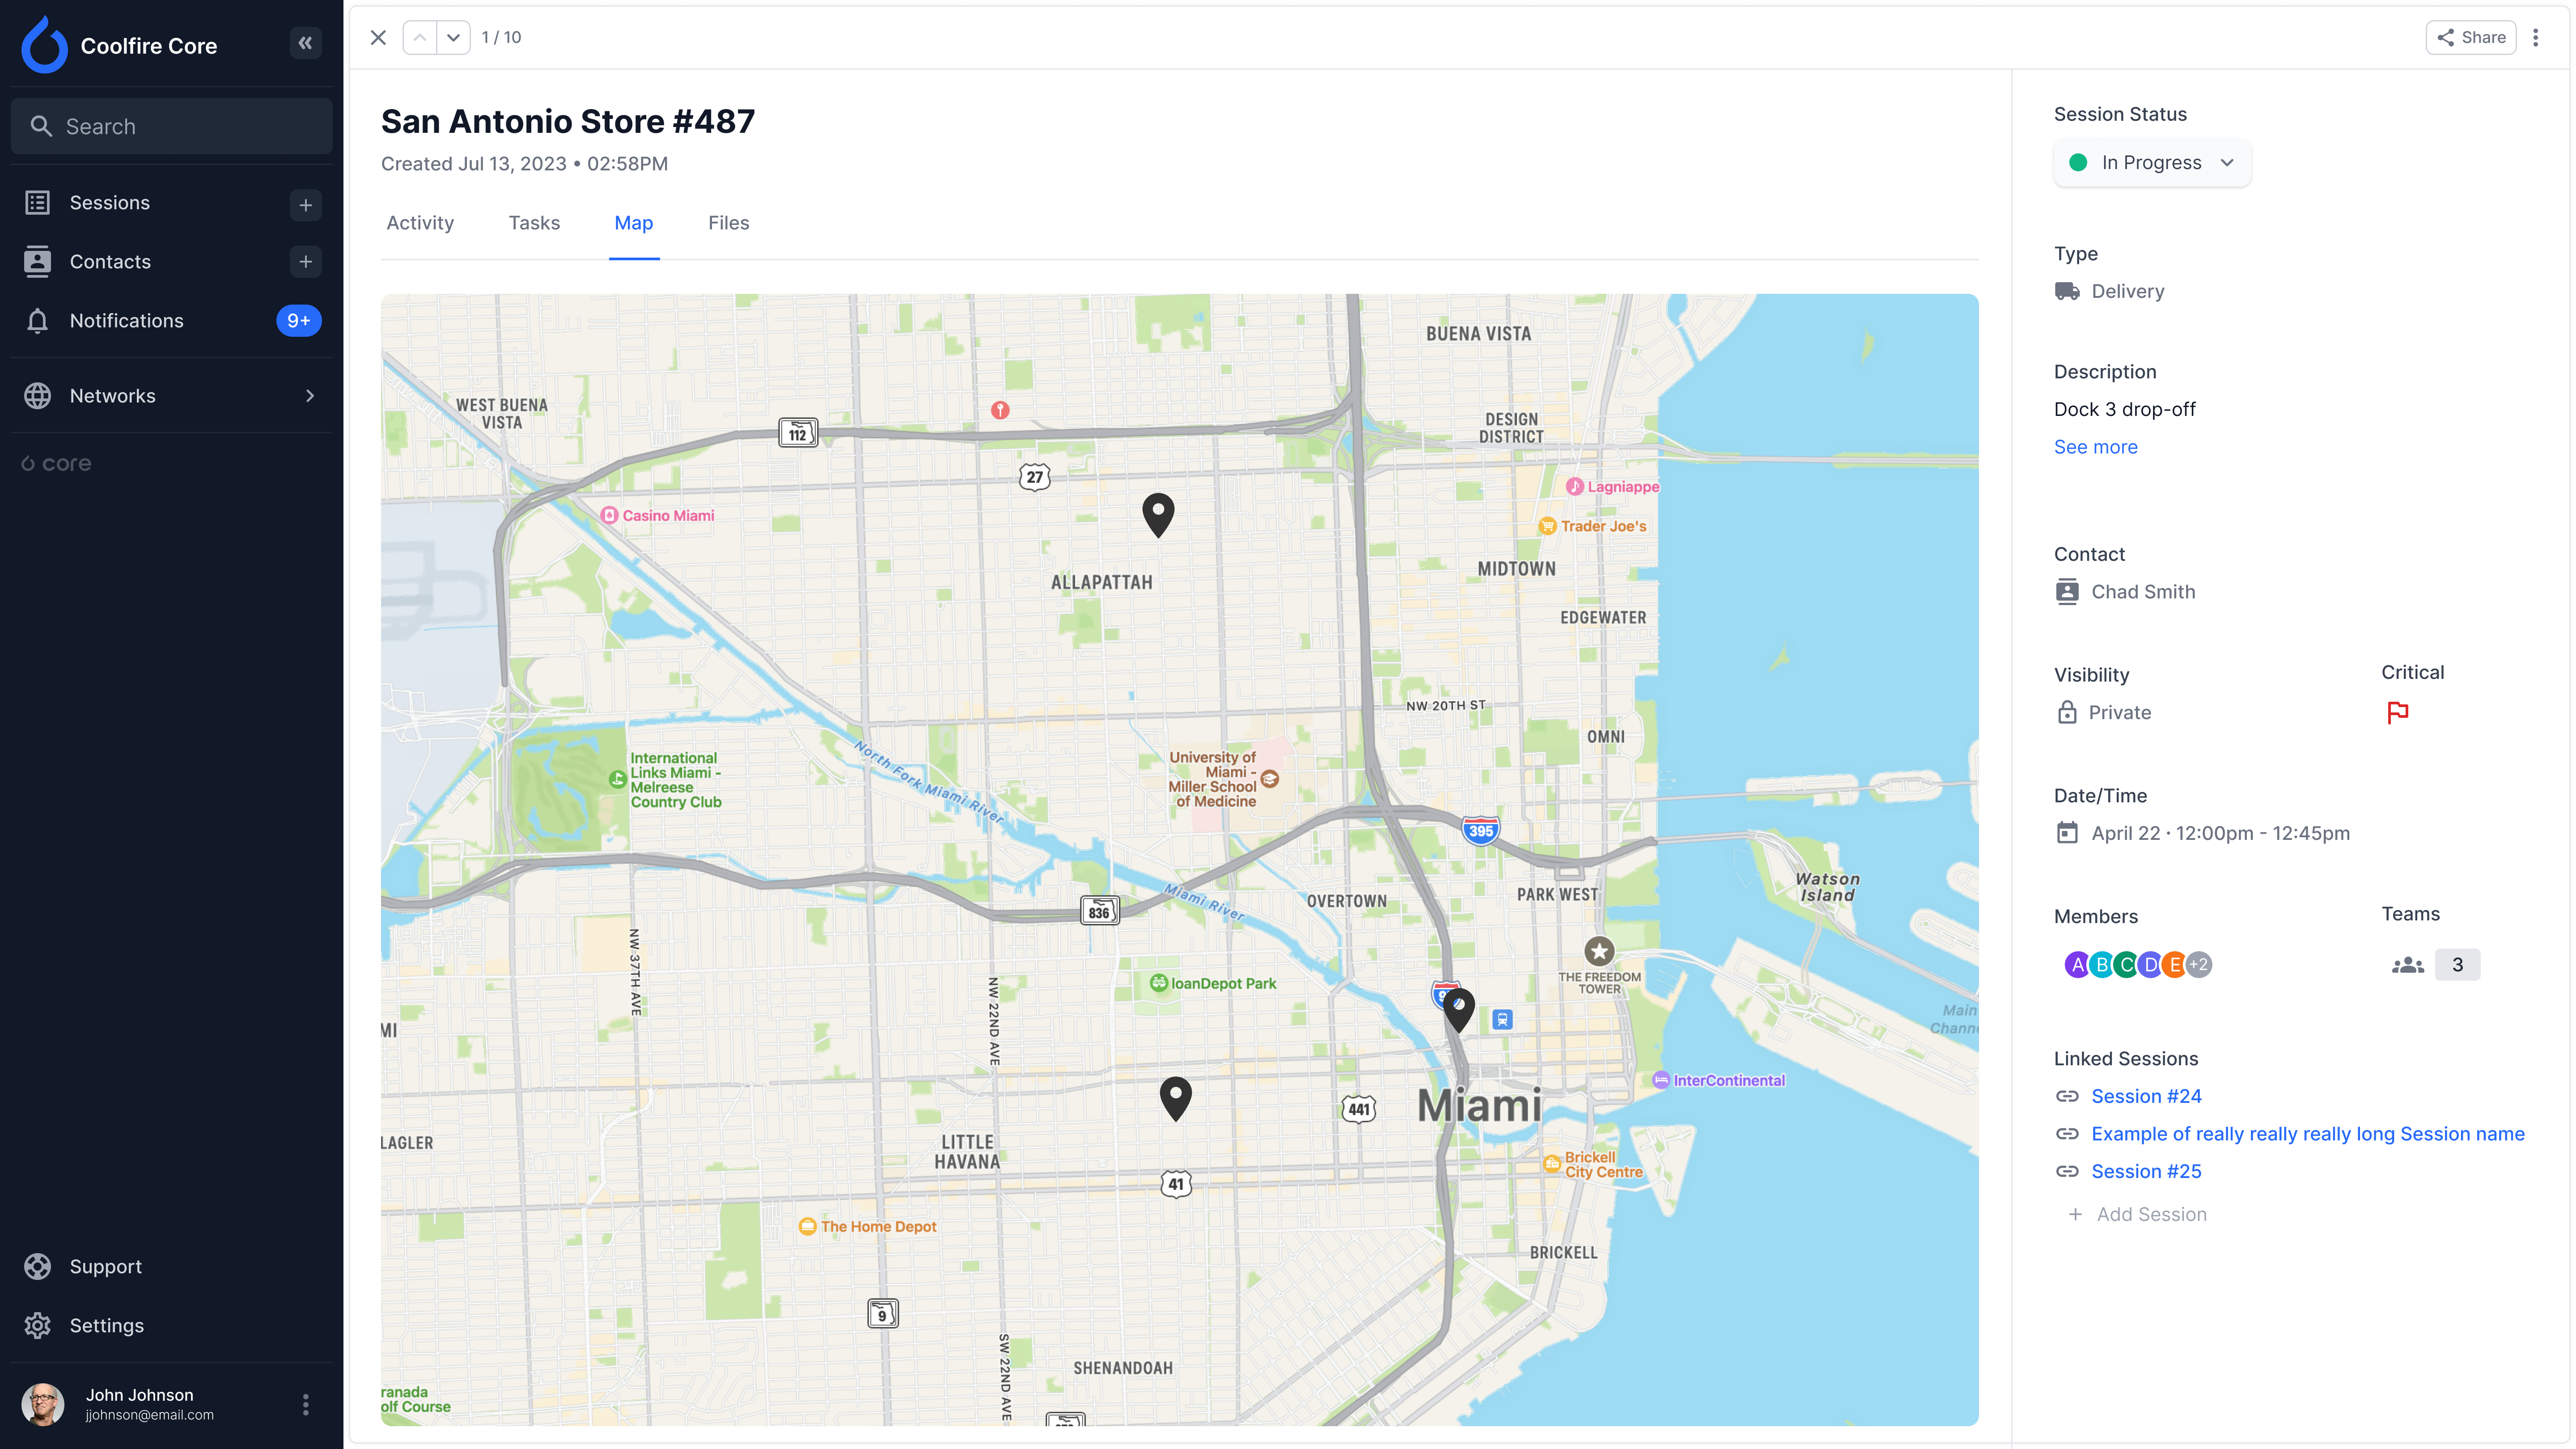 Understand the location and status of your team and assets. Enforce geo-location requirements to submit tasks, get alerted when people break geo-fences, and other business requirements to get accurate and consistent results.